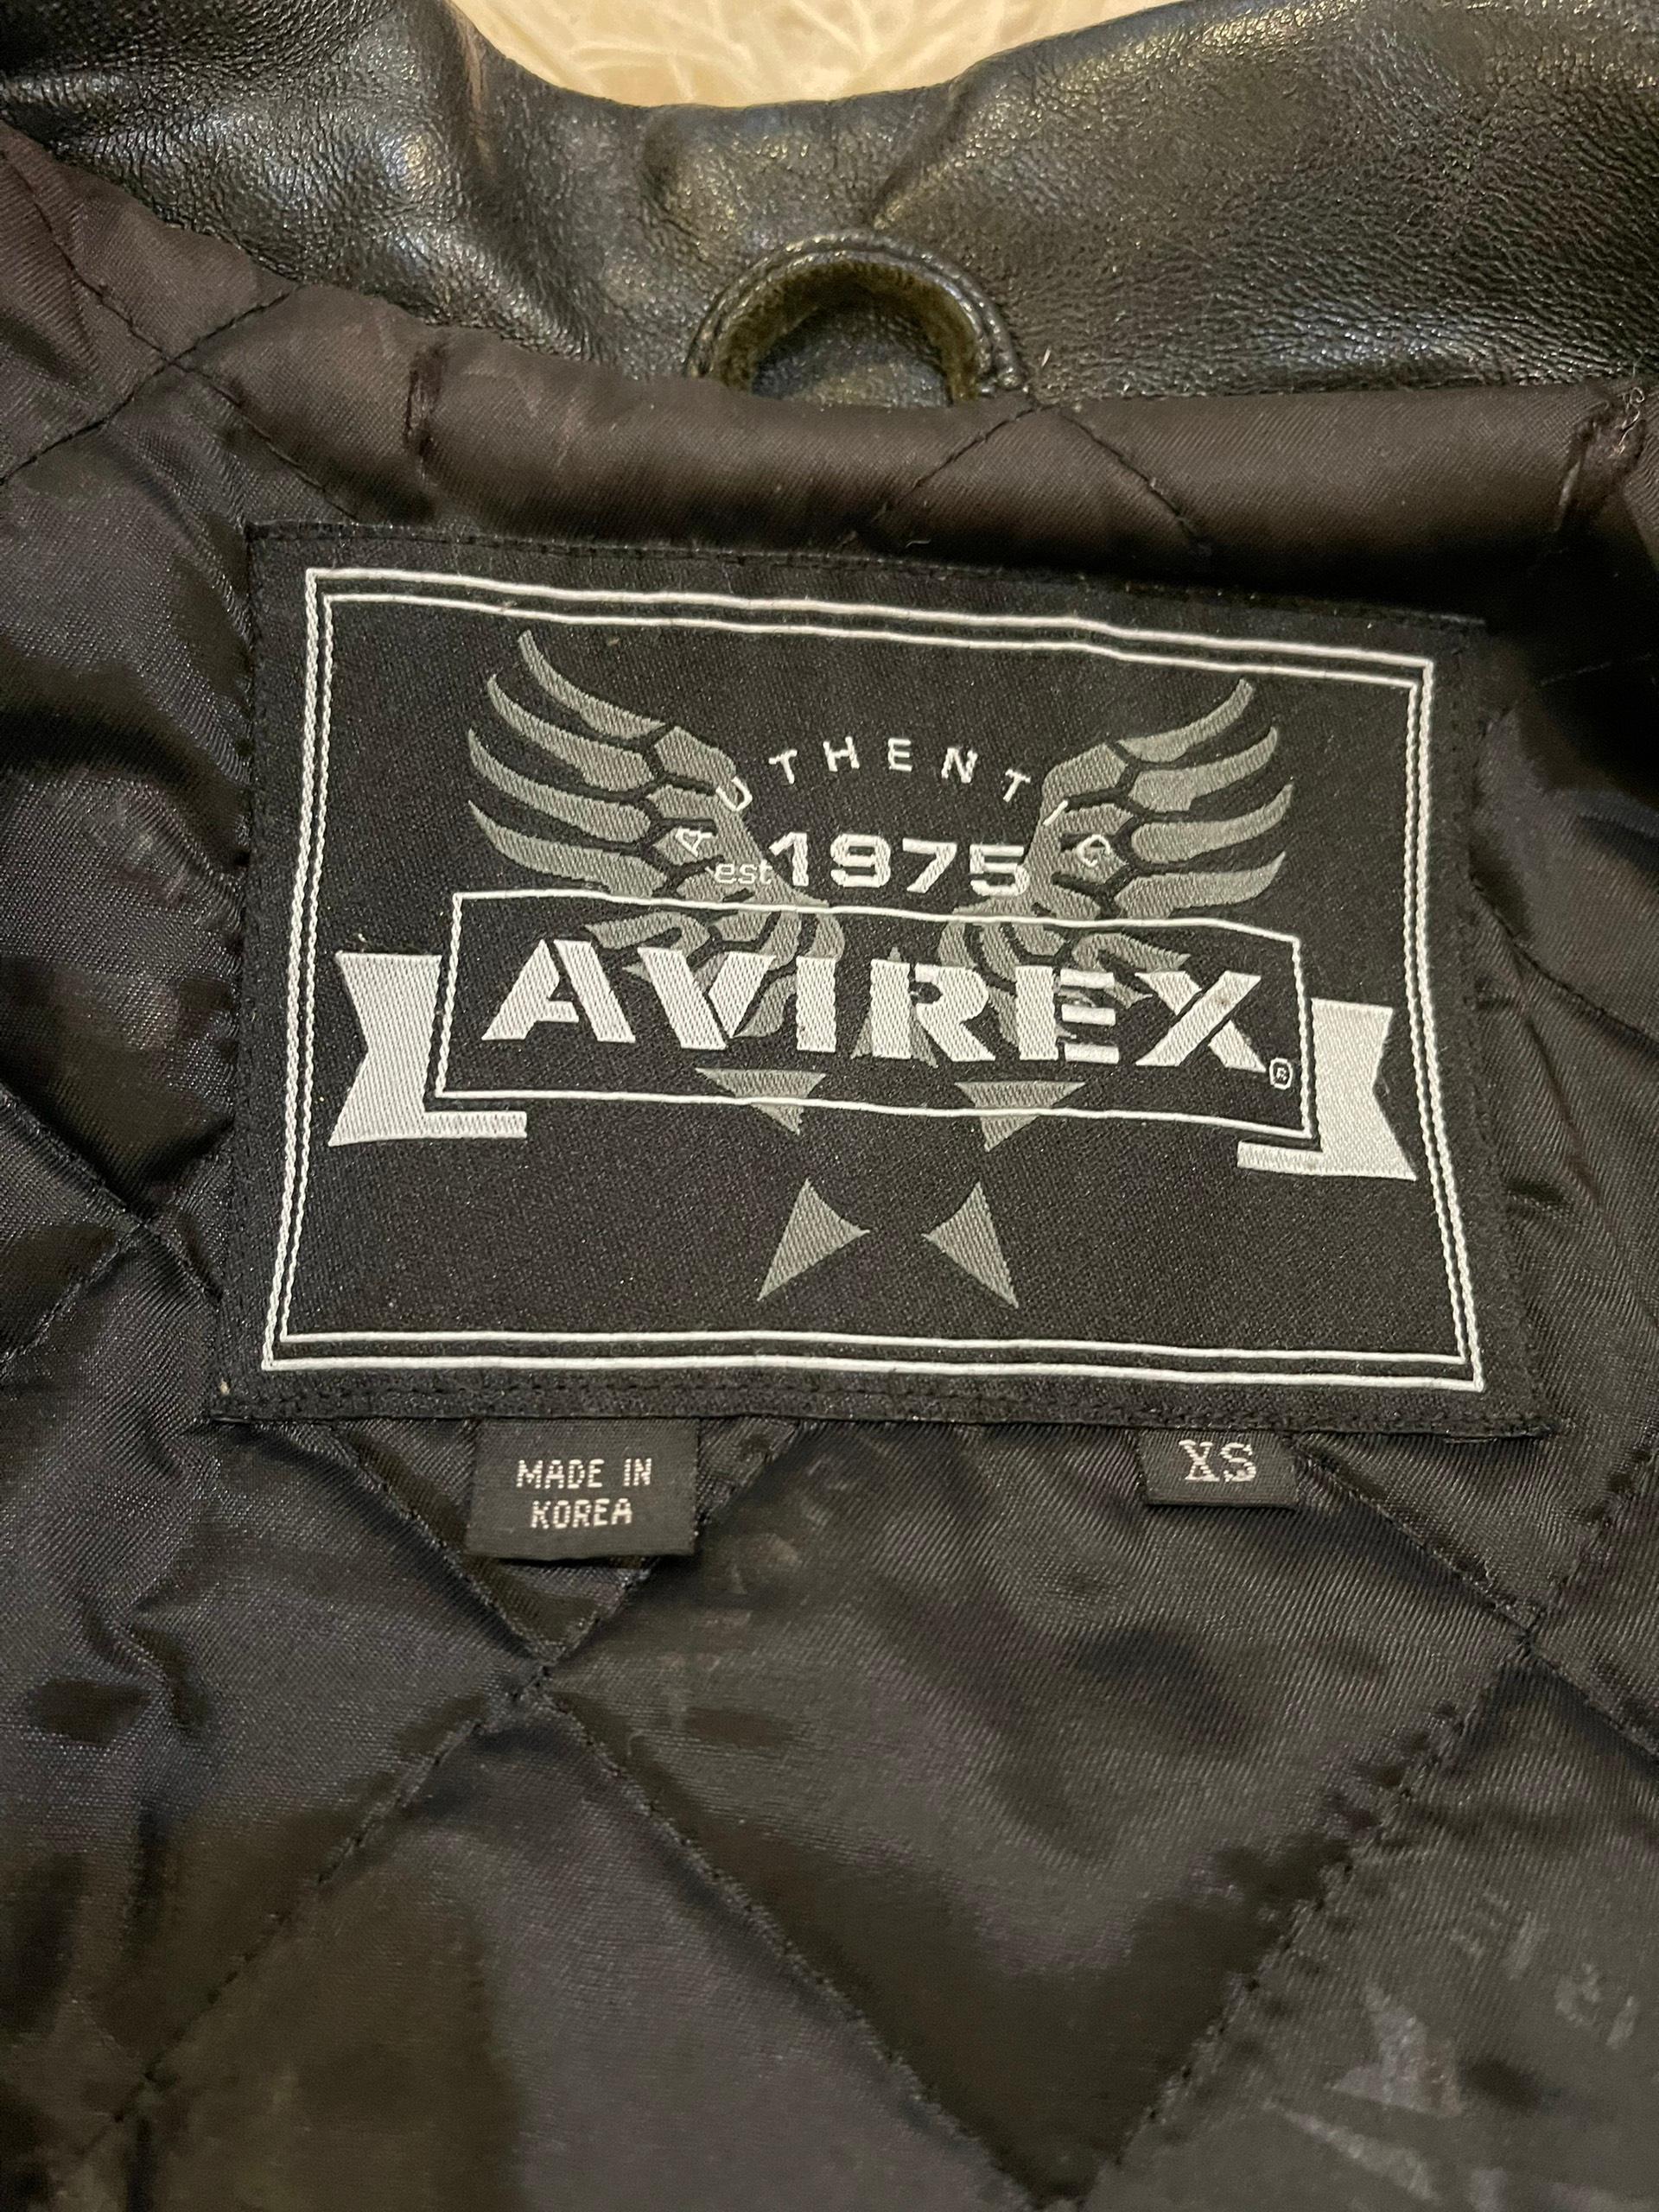 Avirex Limited Edition Hand Painted Dragon Leather Jacket, 3 of 300 For Sale 4